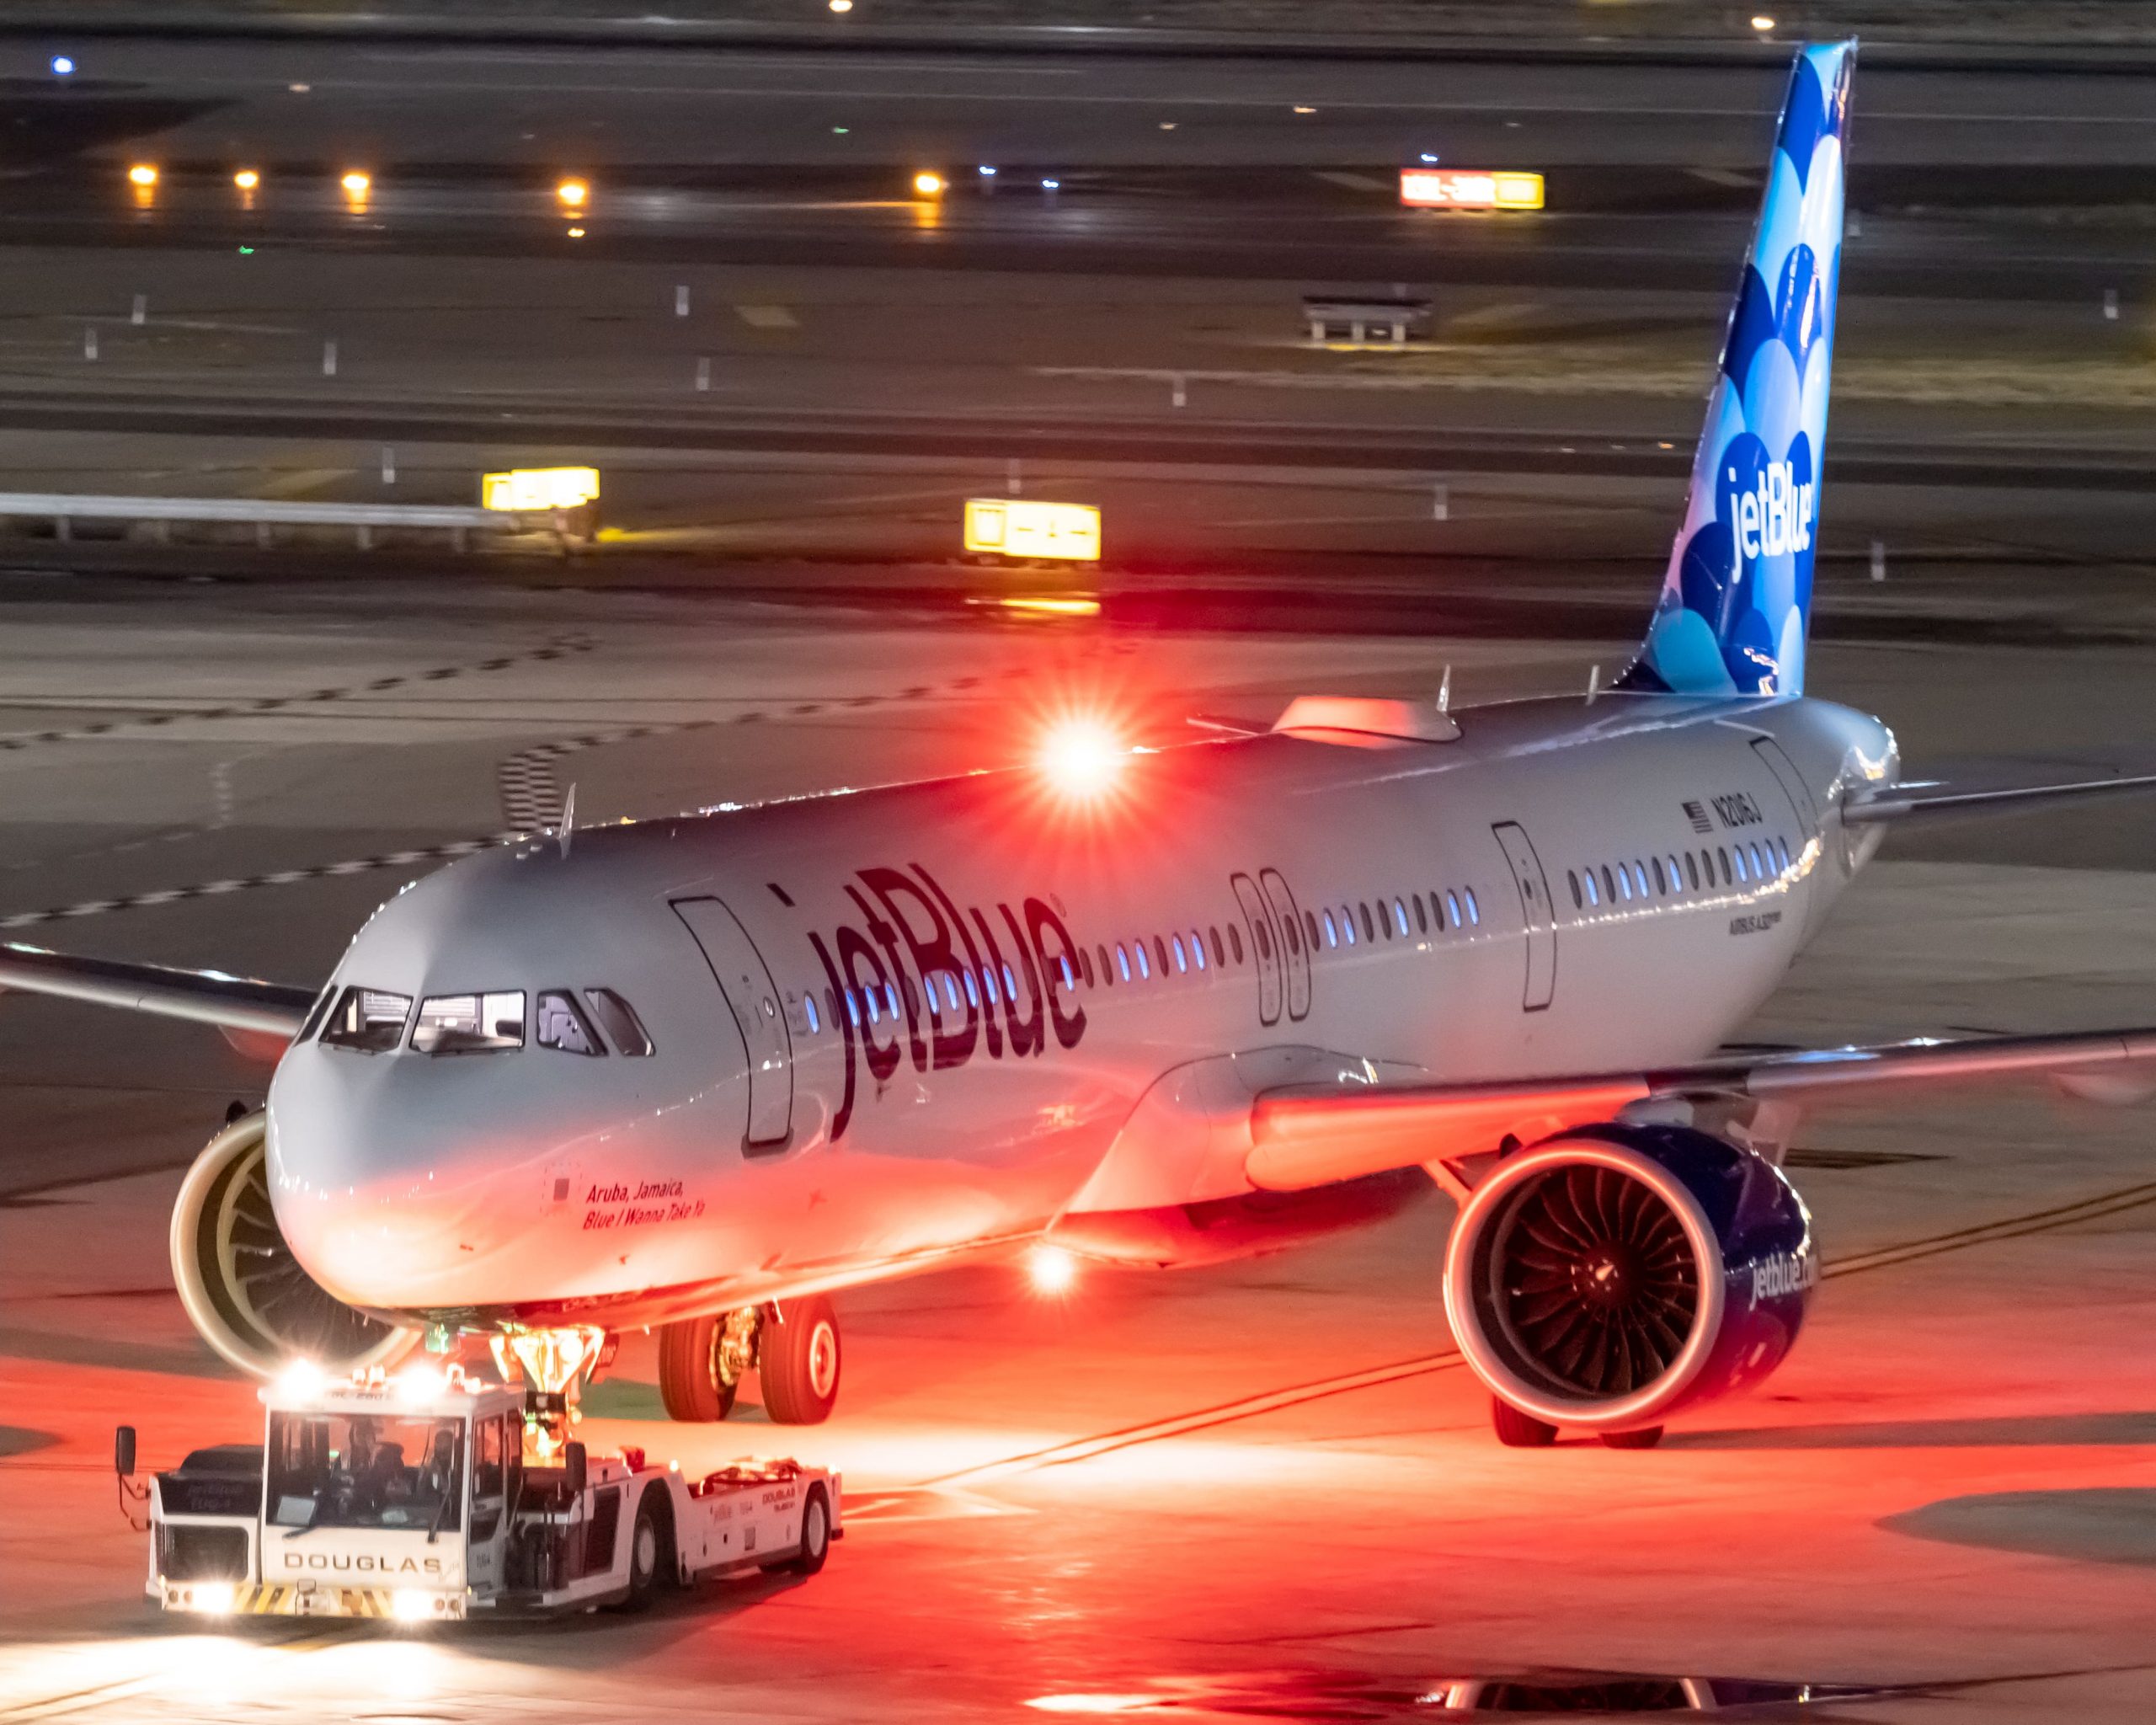 A JetBlue Airways Airbus A321neo seen being pushed back at New York's John F Kennedy International Airport. Photo Credit: Vincenzo Pace (@jfkjetsofficial)